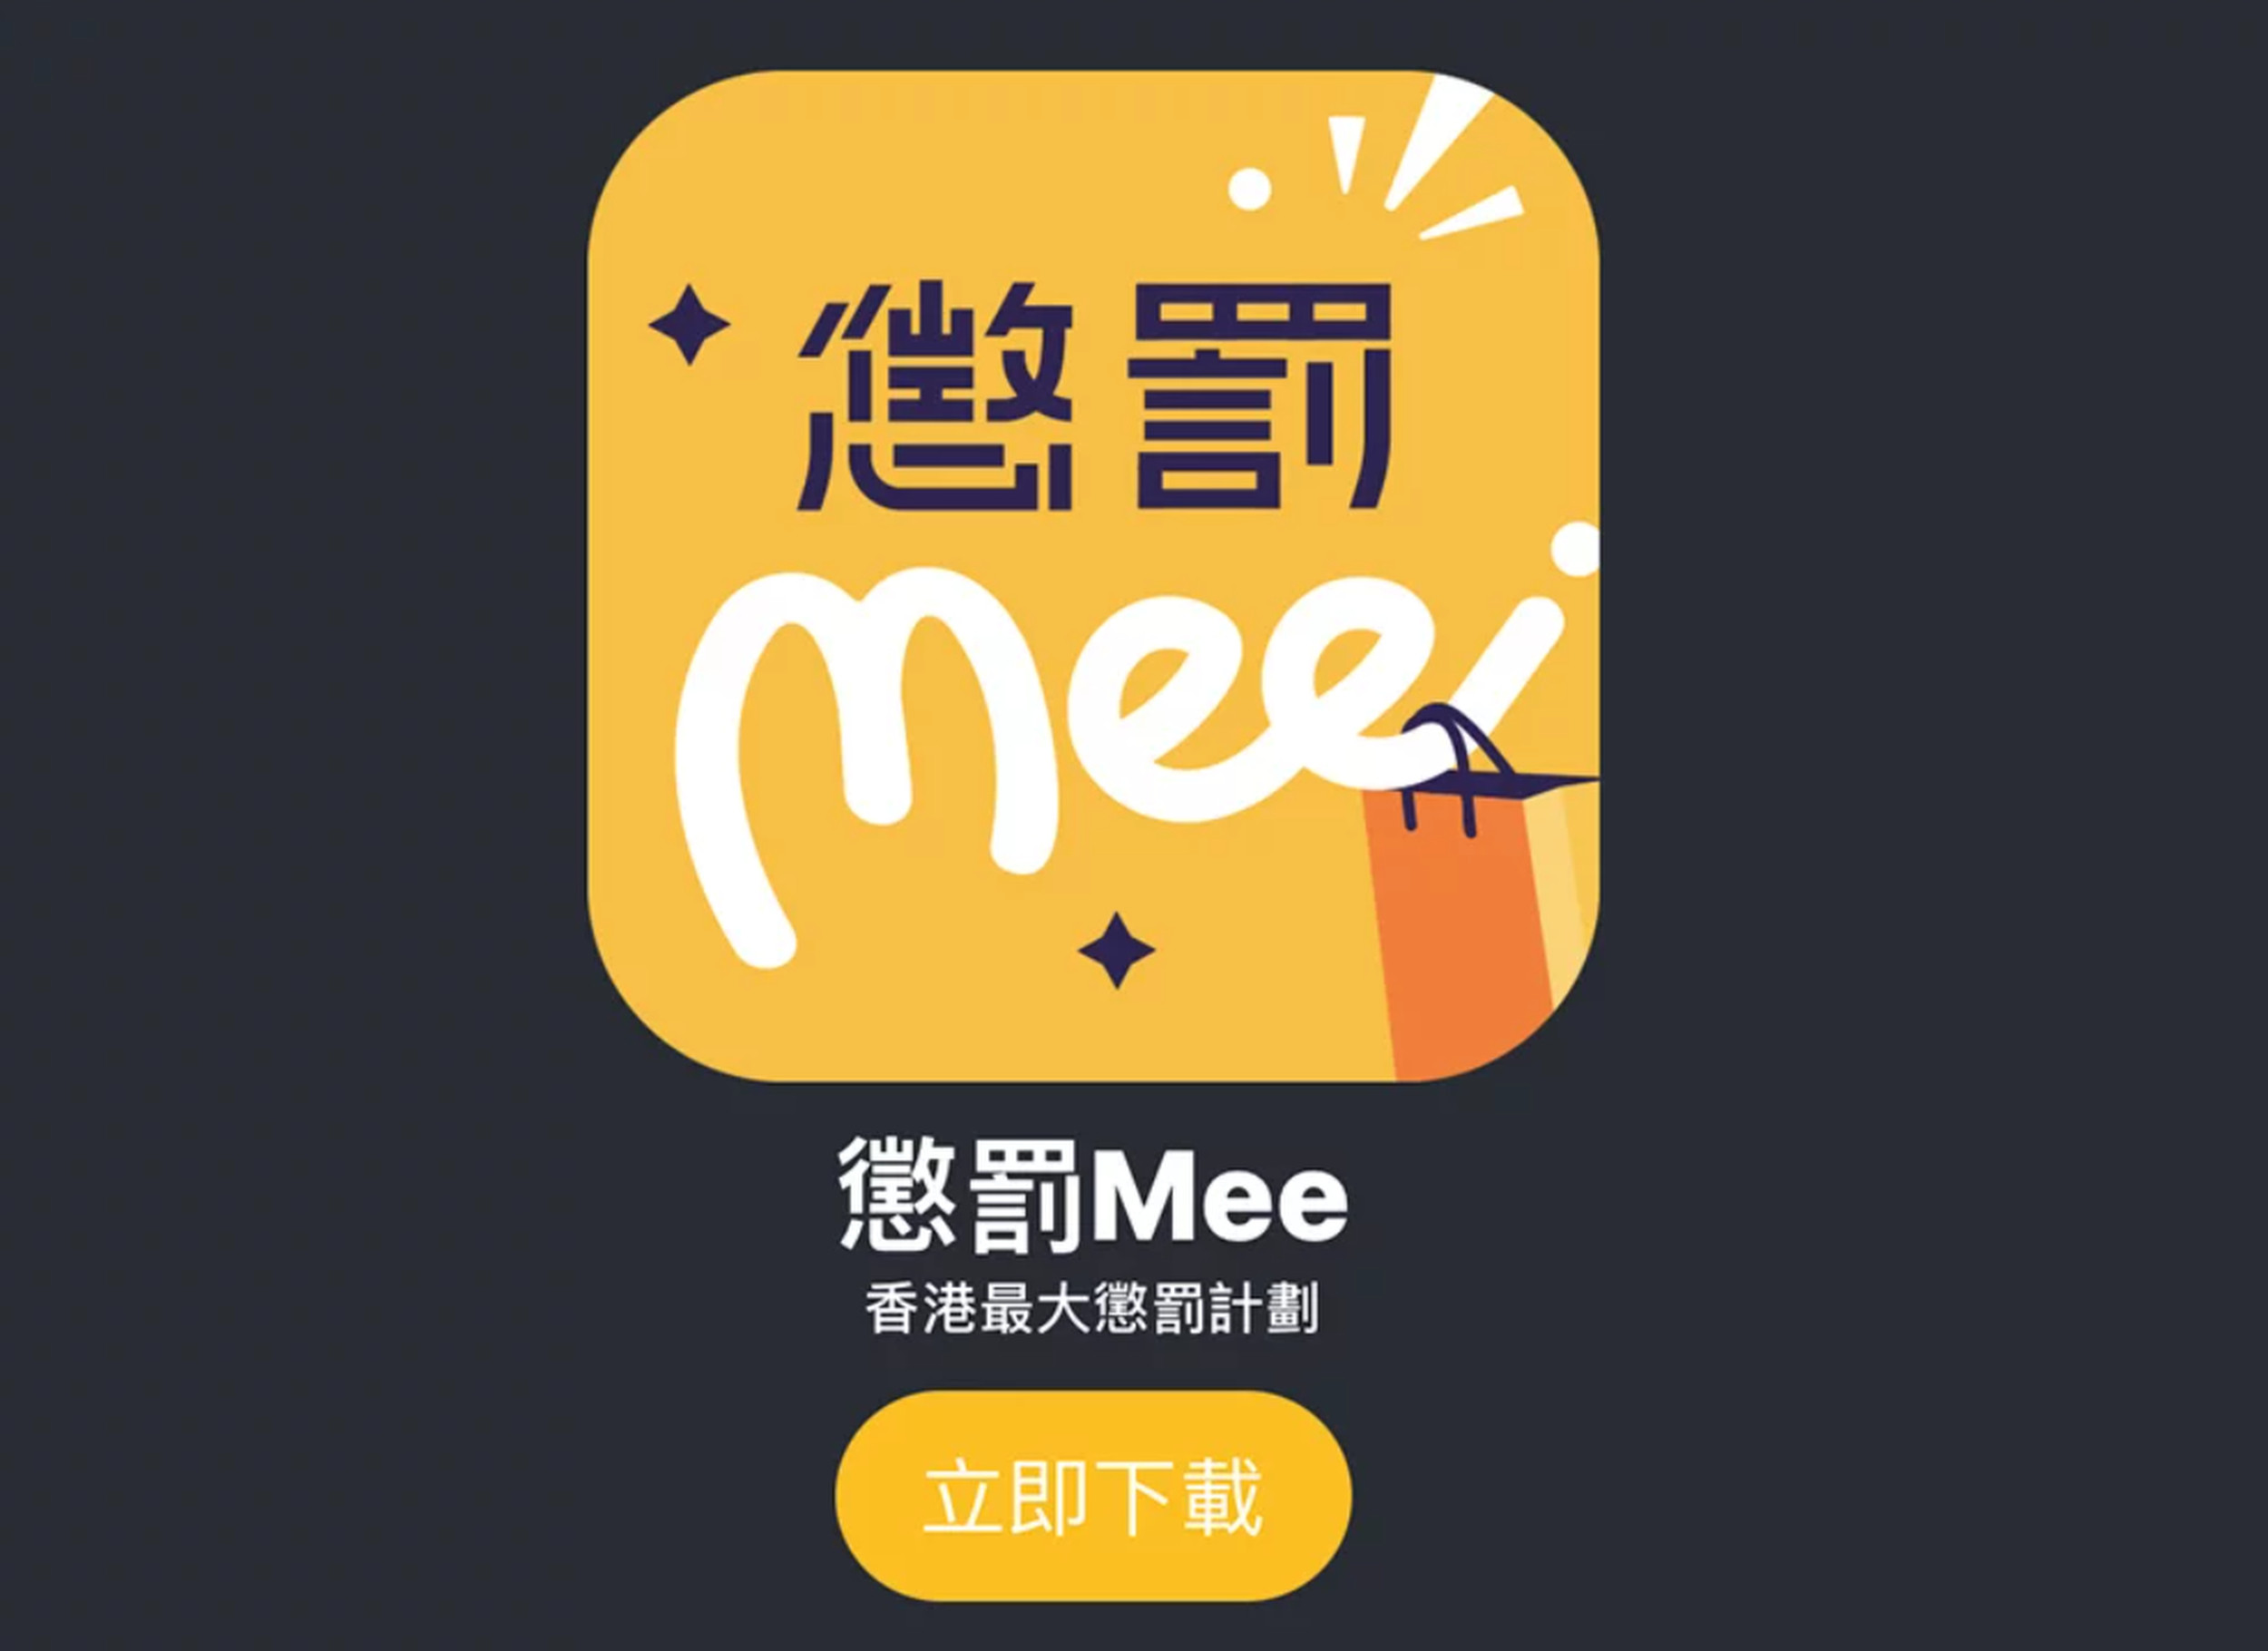 The Mee app, which sells Hong Kong-style delicacies, has vanished from major app stores after a director was arrested. Photo: Handout


